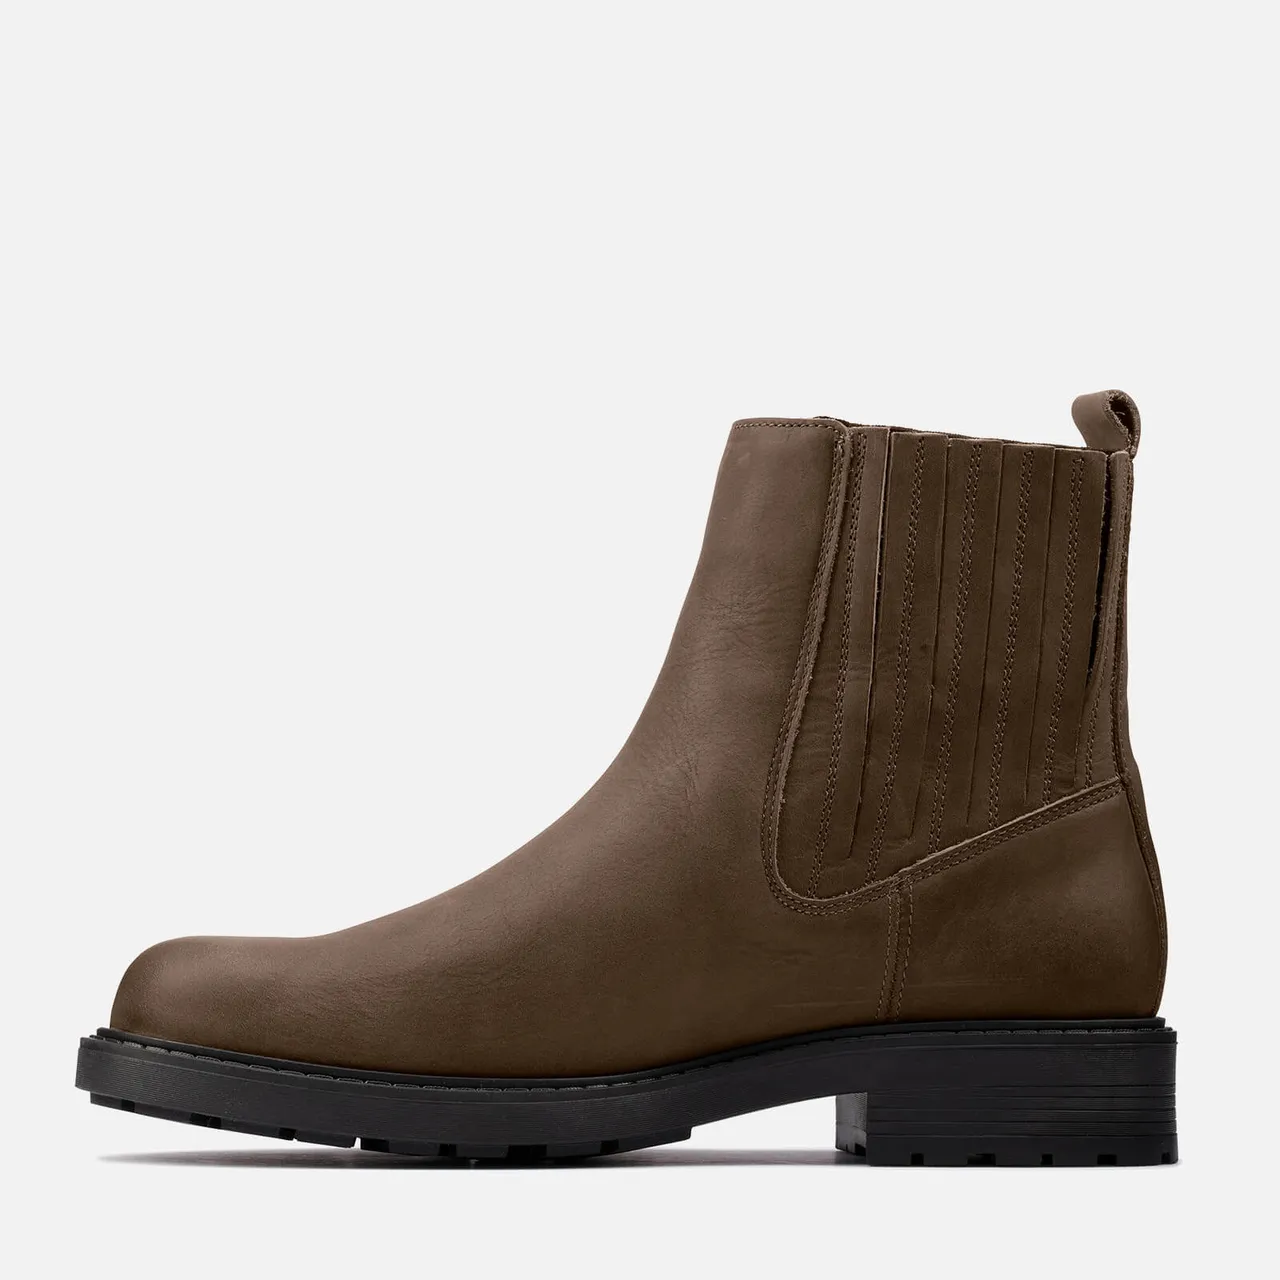 Clarks Orinoco 2 Mid-Length Leather Chelsea Boots